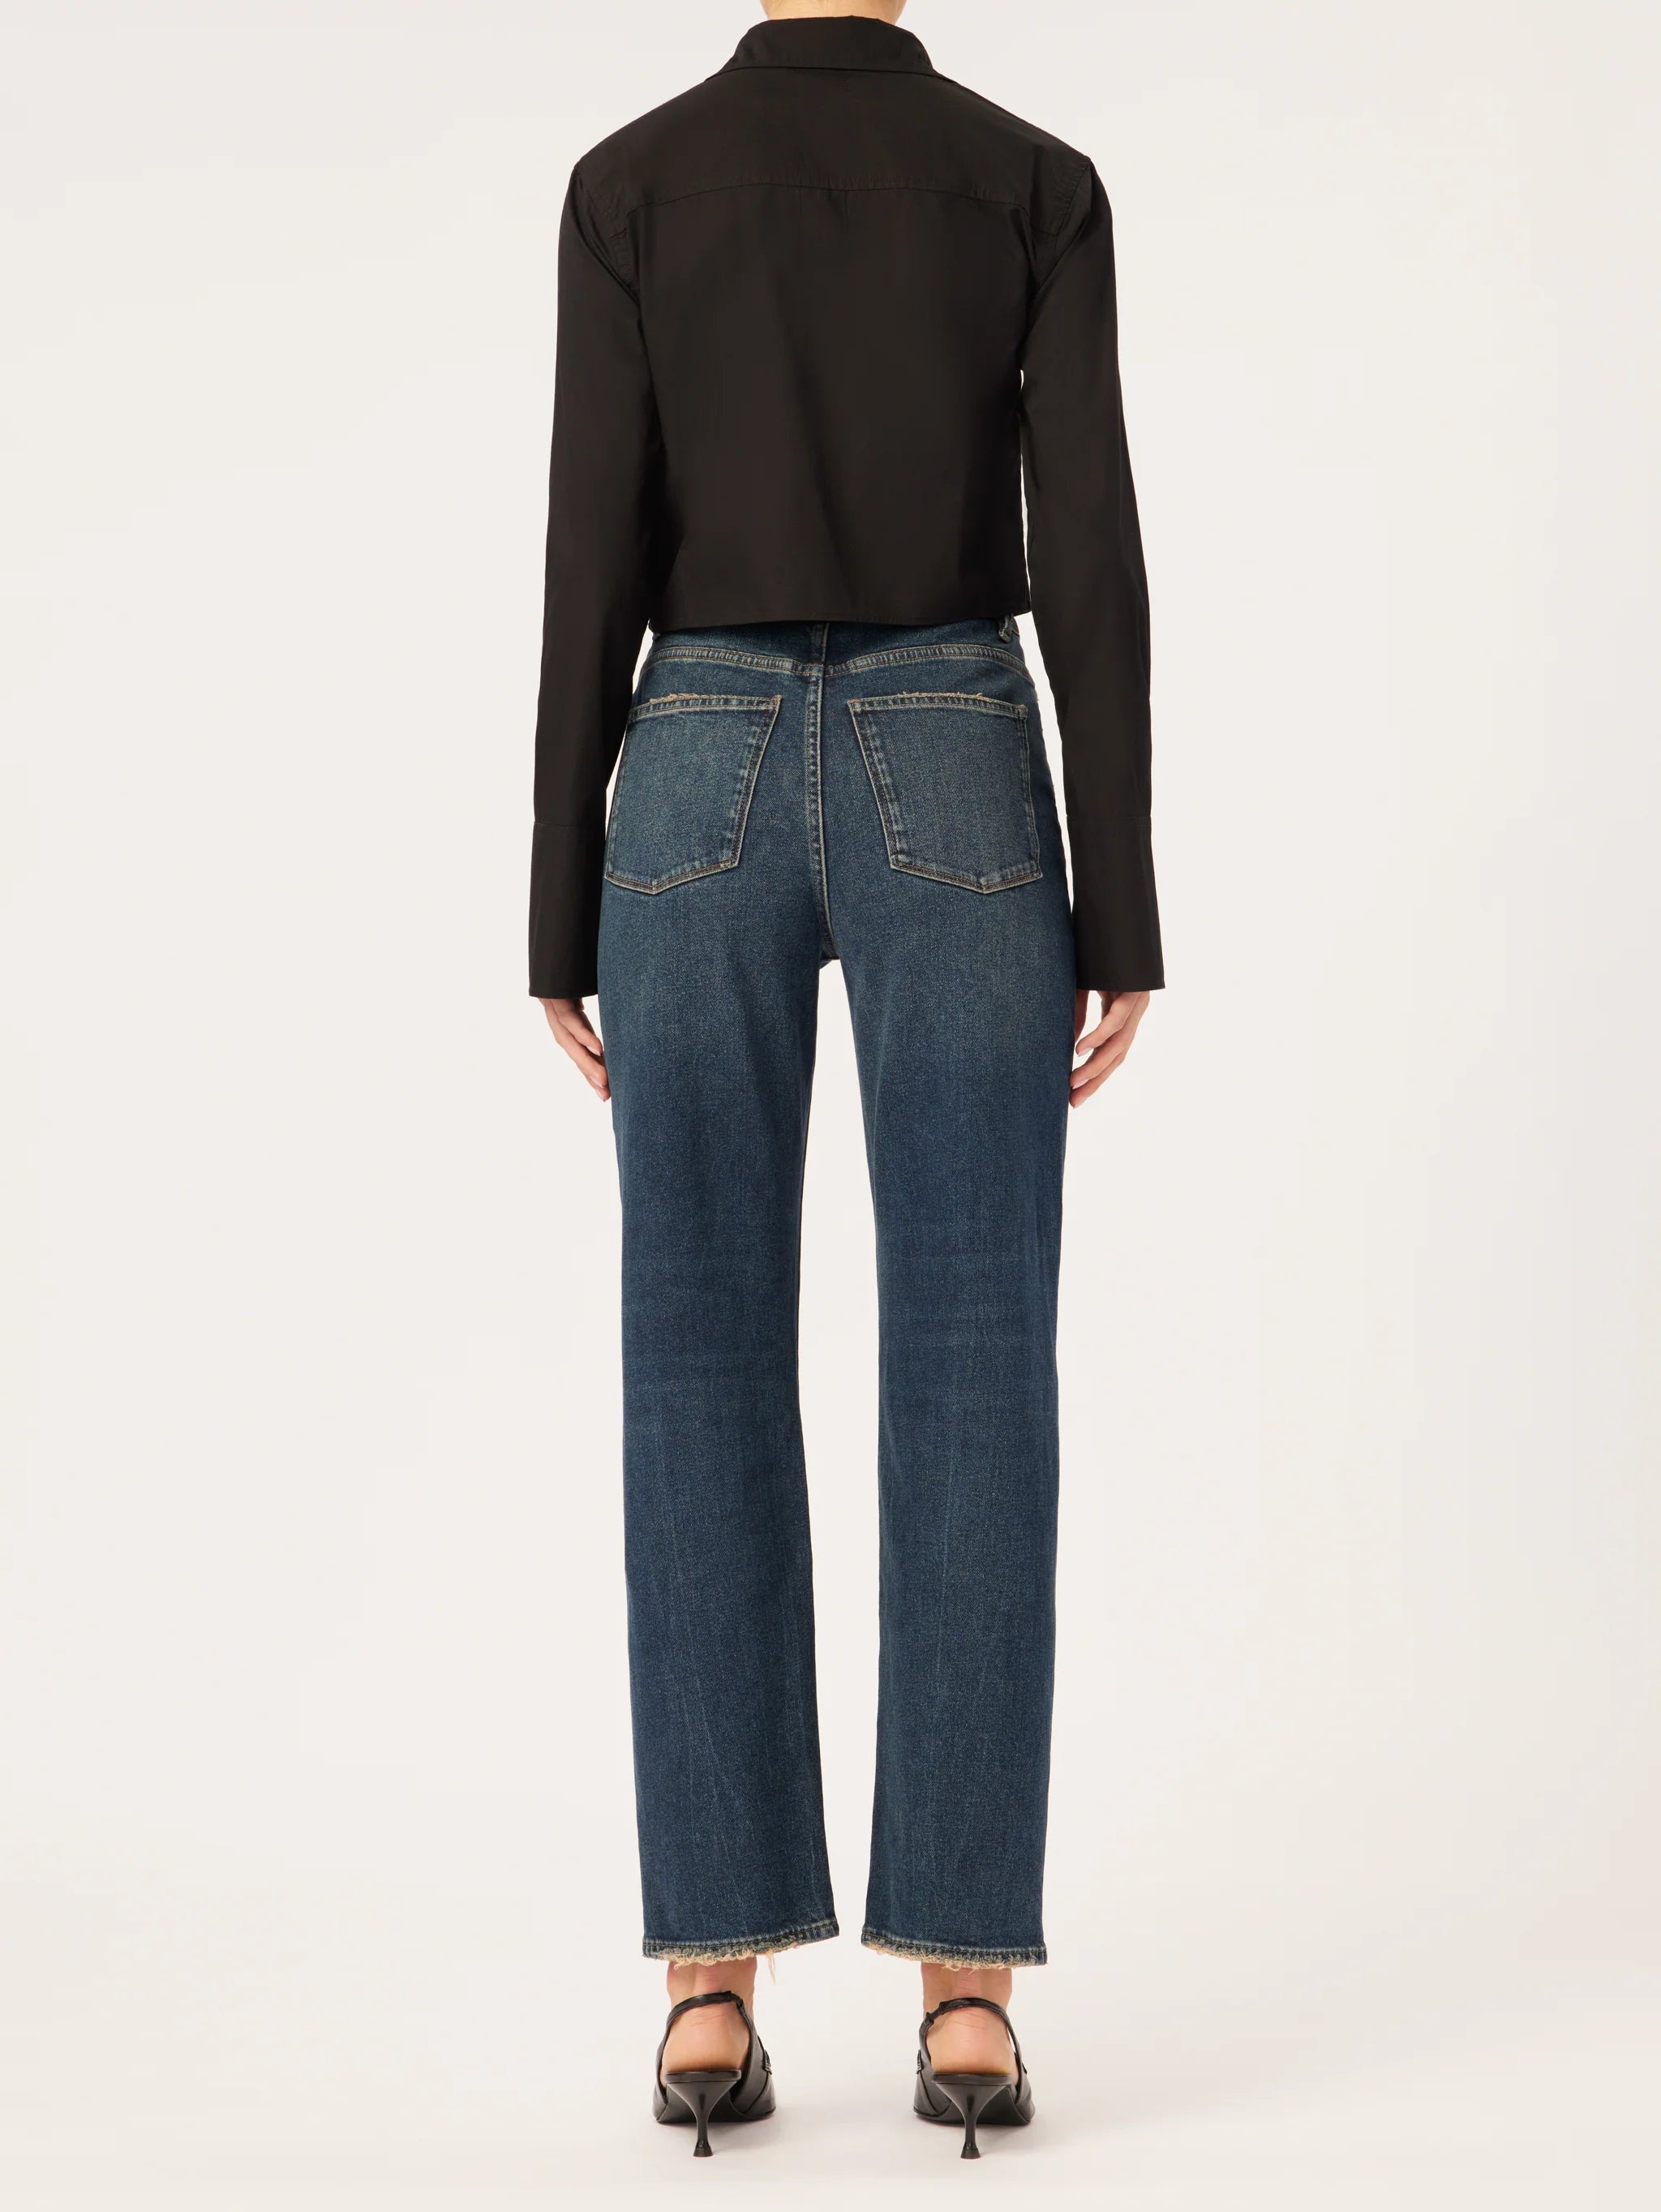 The back view of a woman wearing DL1961 Enora Cigarette High Rise - Broadbay jeans and a black shirt.